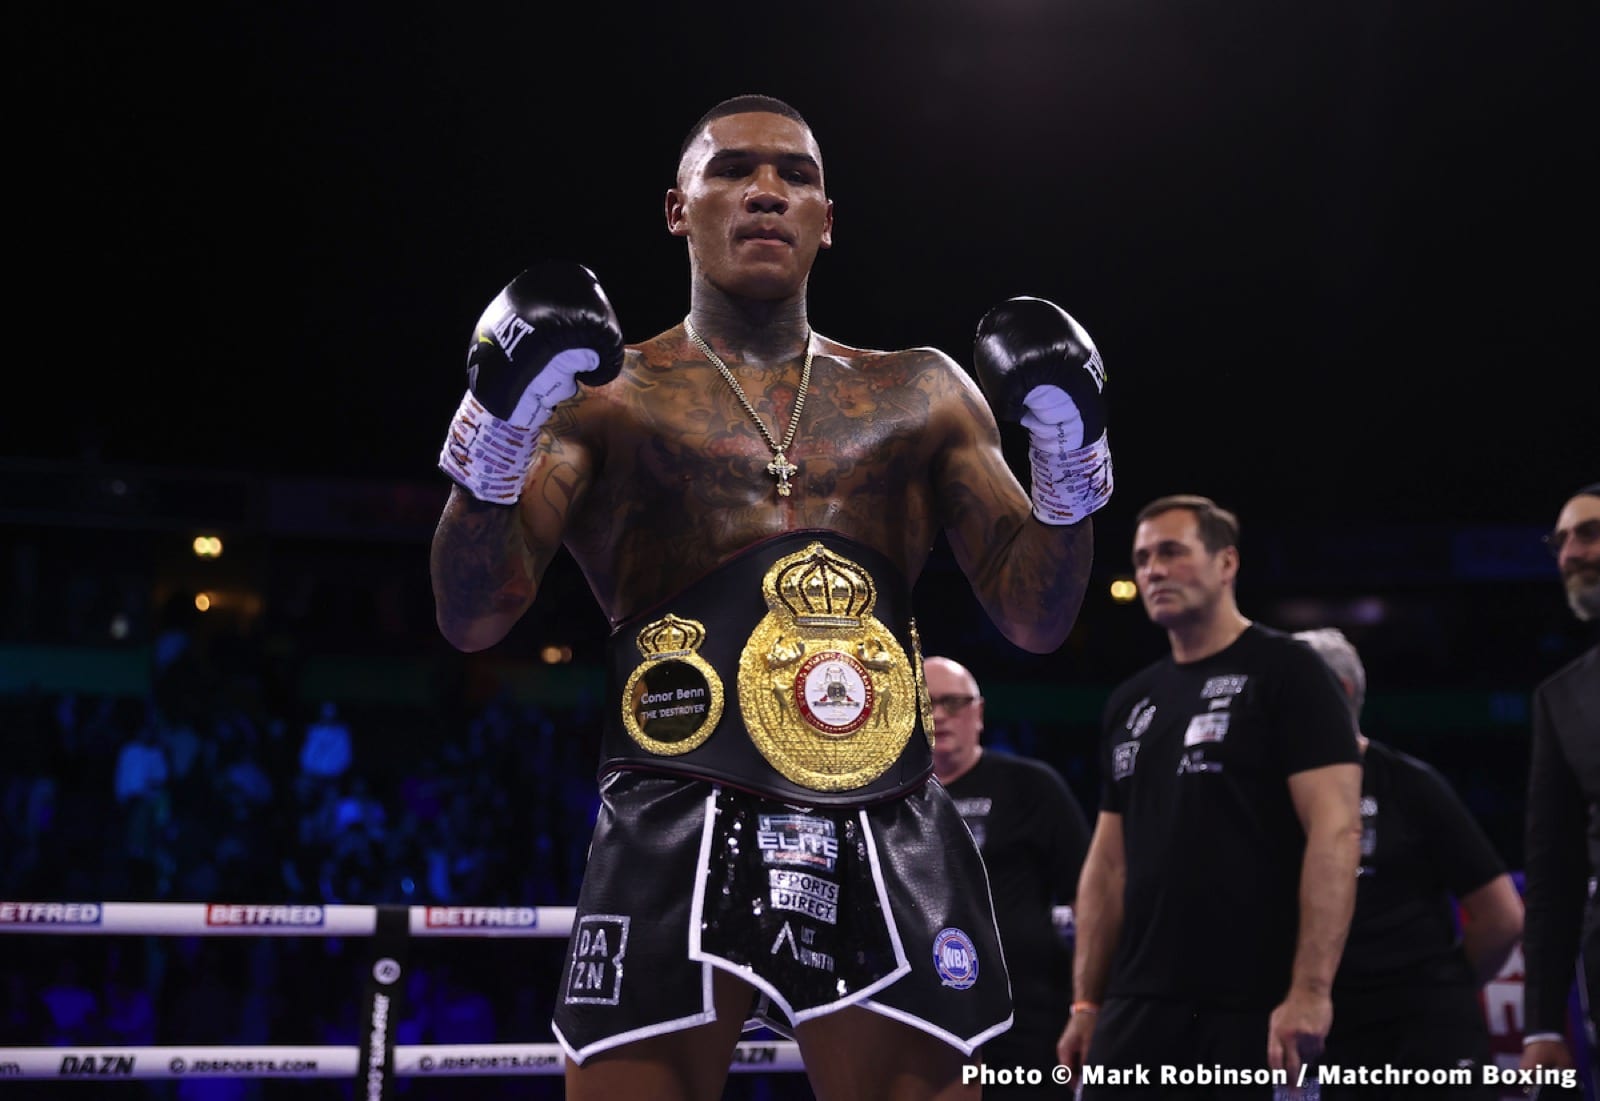 Image: Conor Benn being investigated for another failed drug test